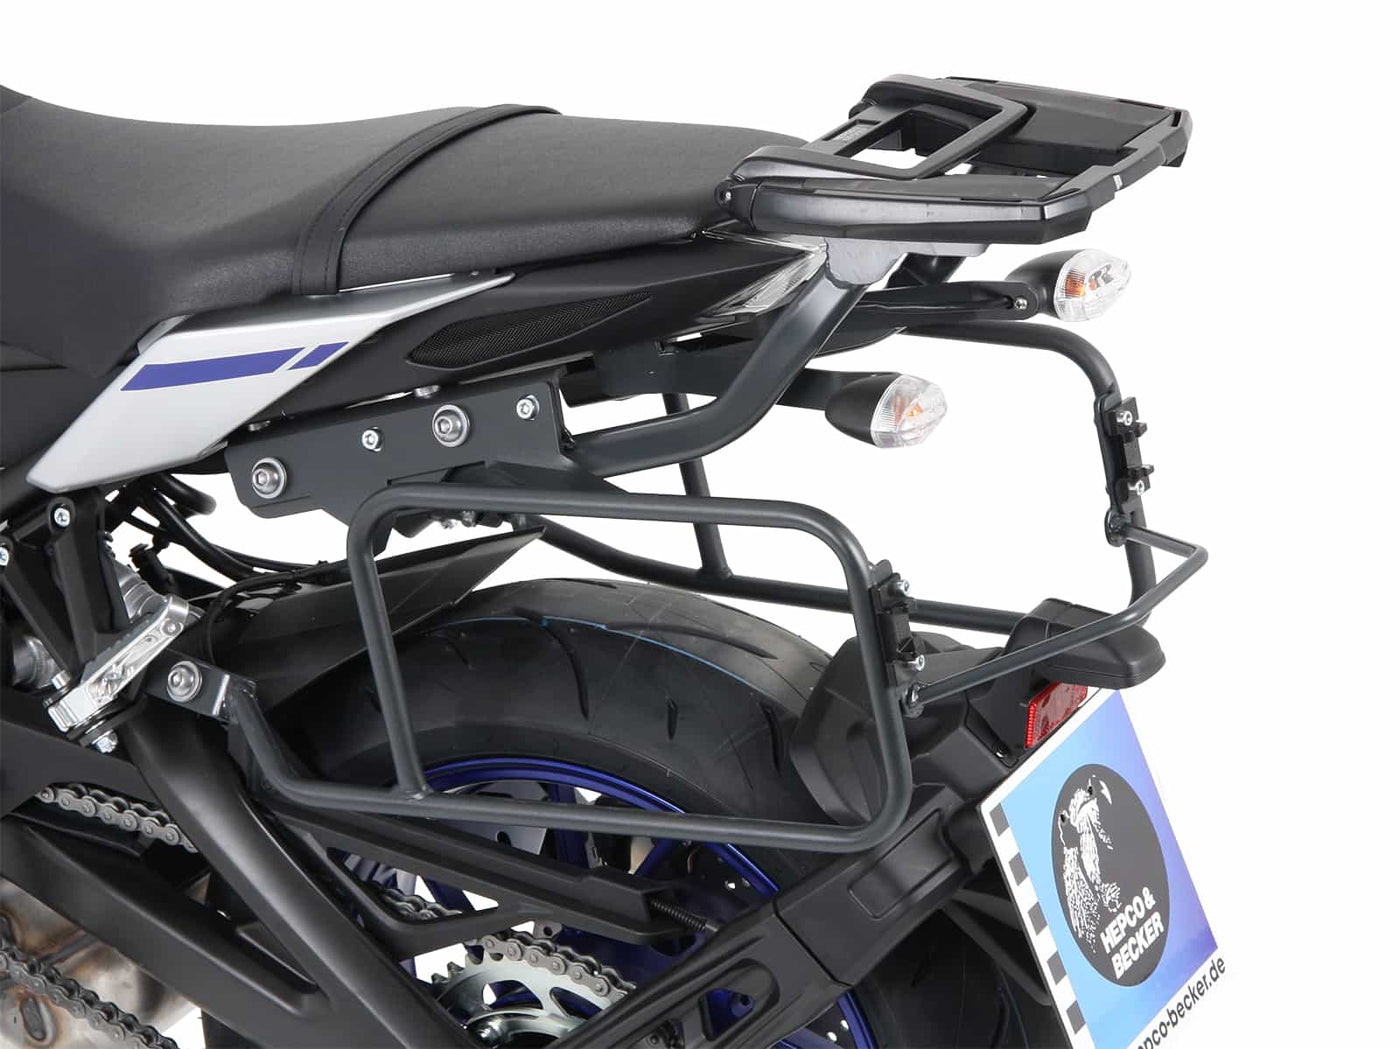 Sidecarrier Lock-it for YAMAHA MT-09 (2017-2020)